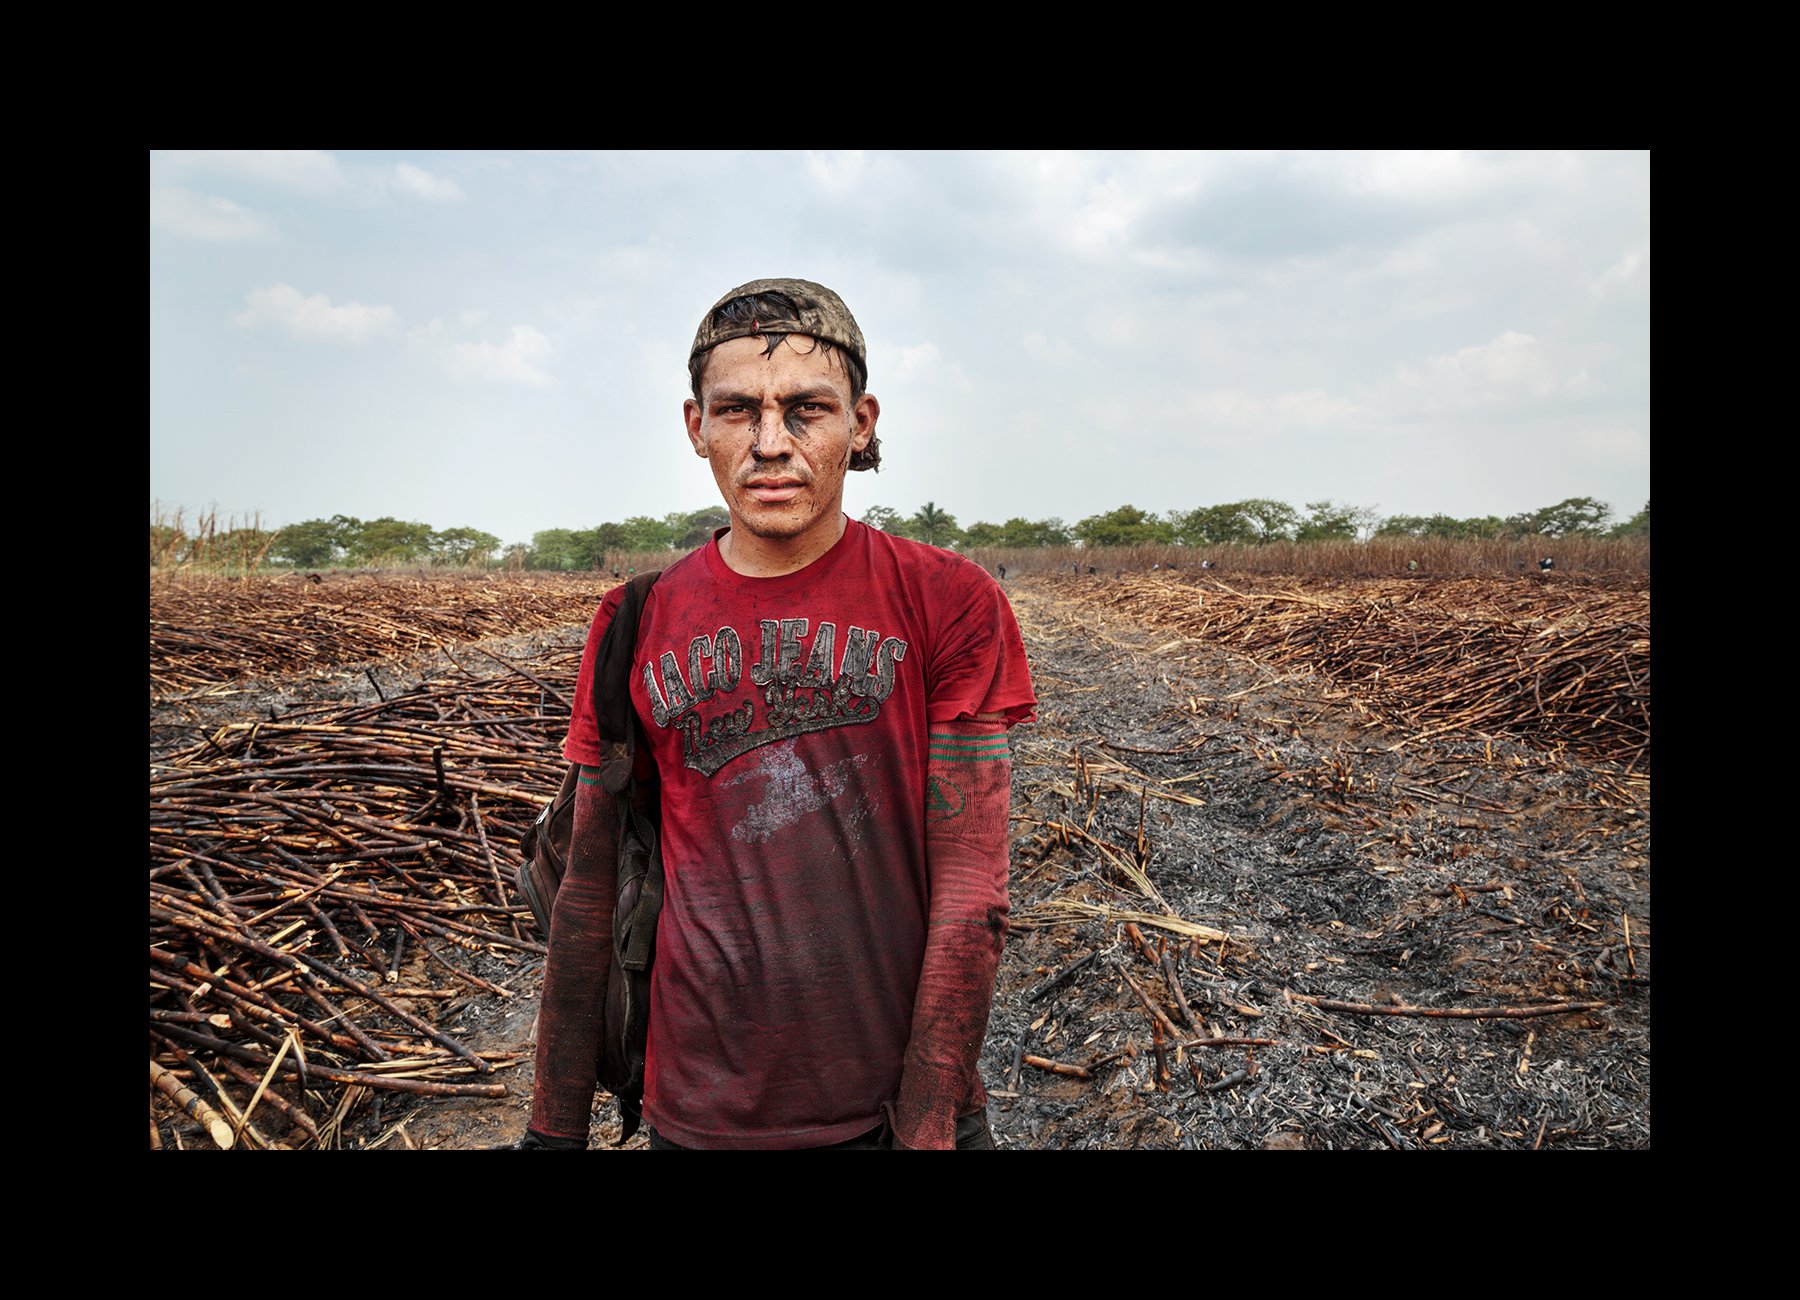  A sugar cane worker poses for a photograph on the Ingenio San Antonio plantation, in Chichigalpa, Nicaragua on May 2, 2014. 